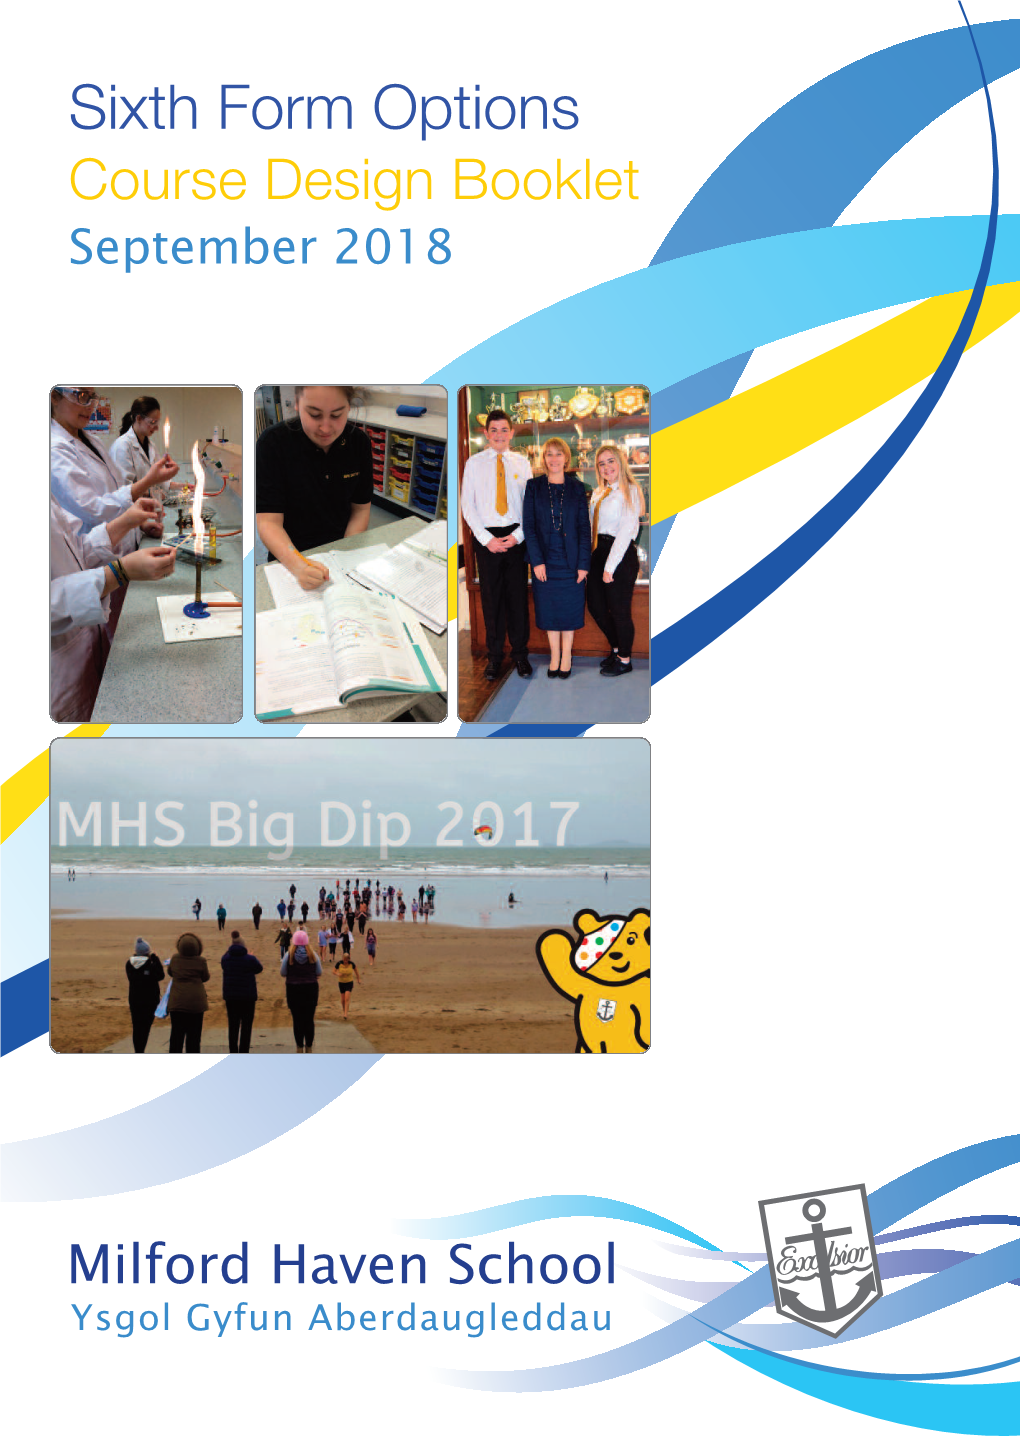 Sixth Form Options Course Design Booklet September 2018